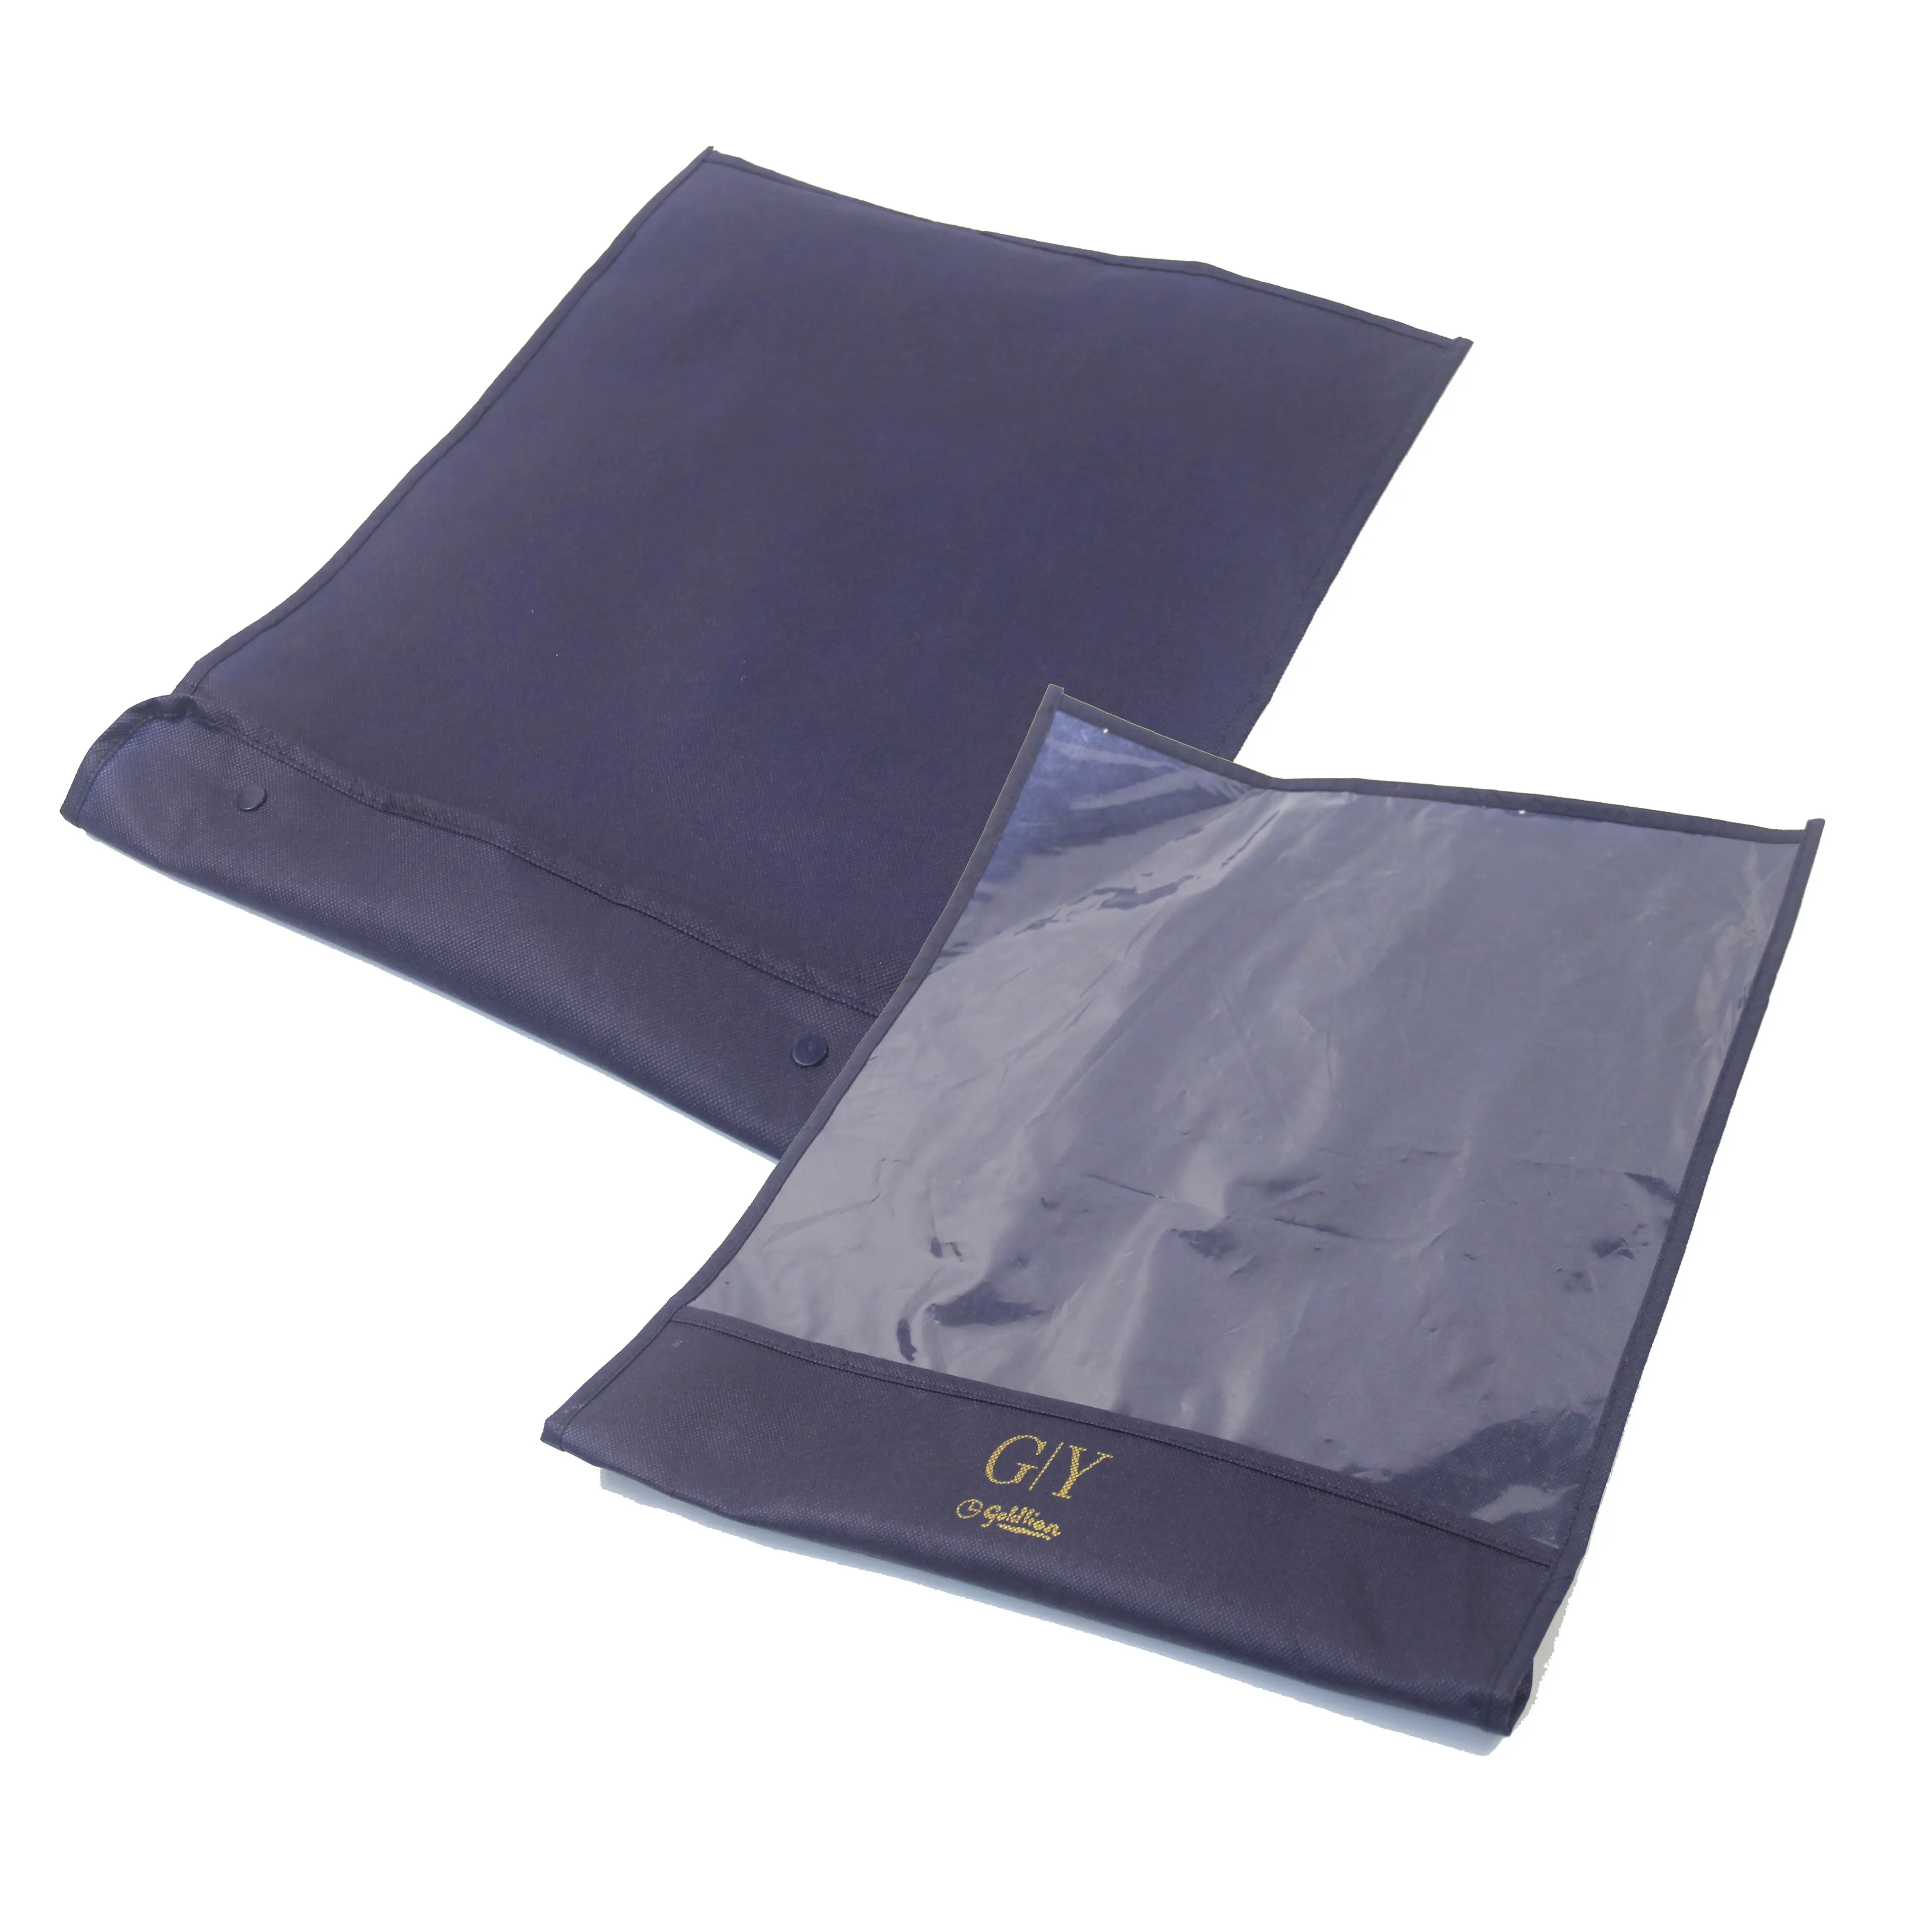 Custom Printed Logo Dark blue non-woven garment bag packaging with clear window for Men's Shirt Tie Suit Pants